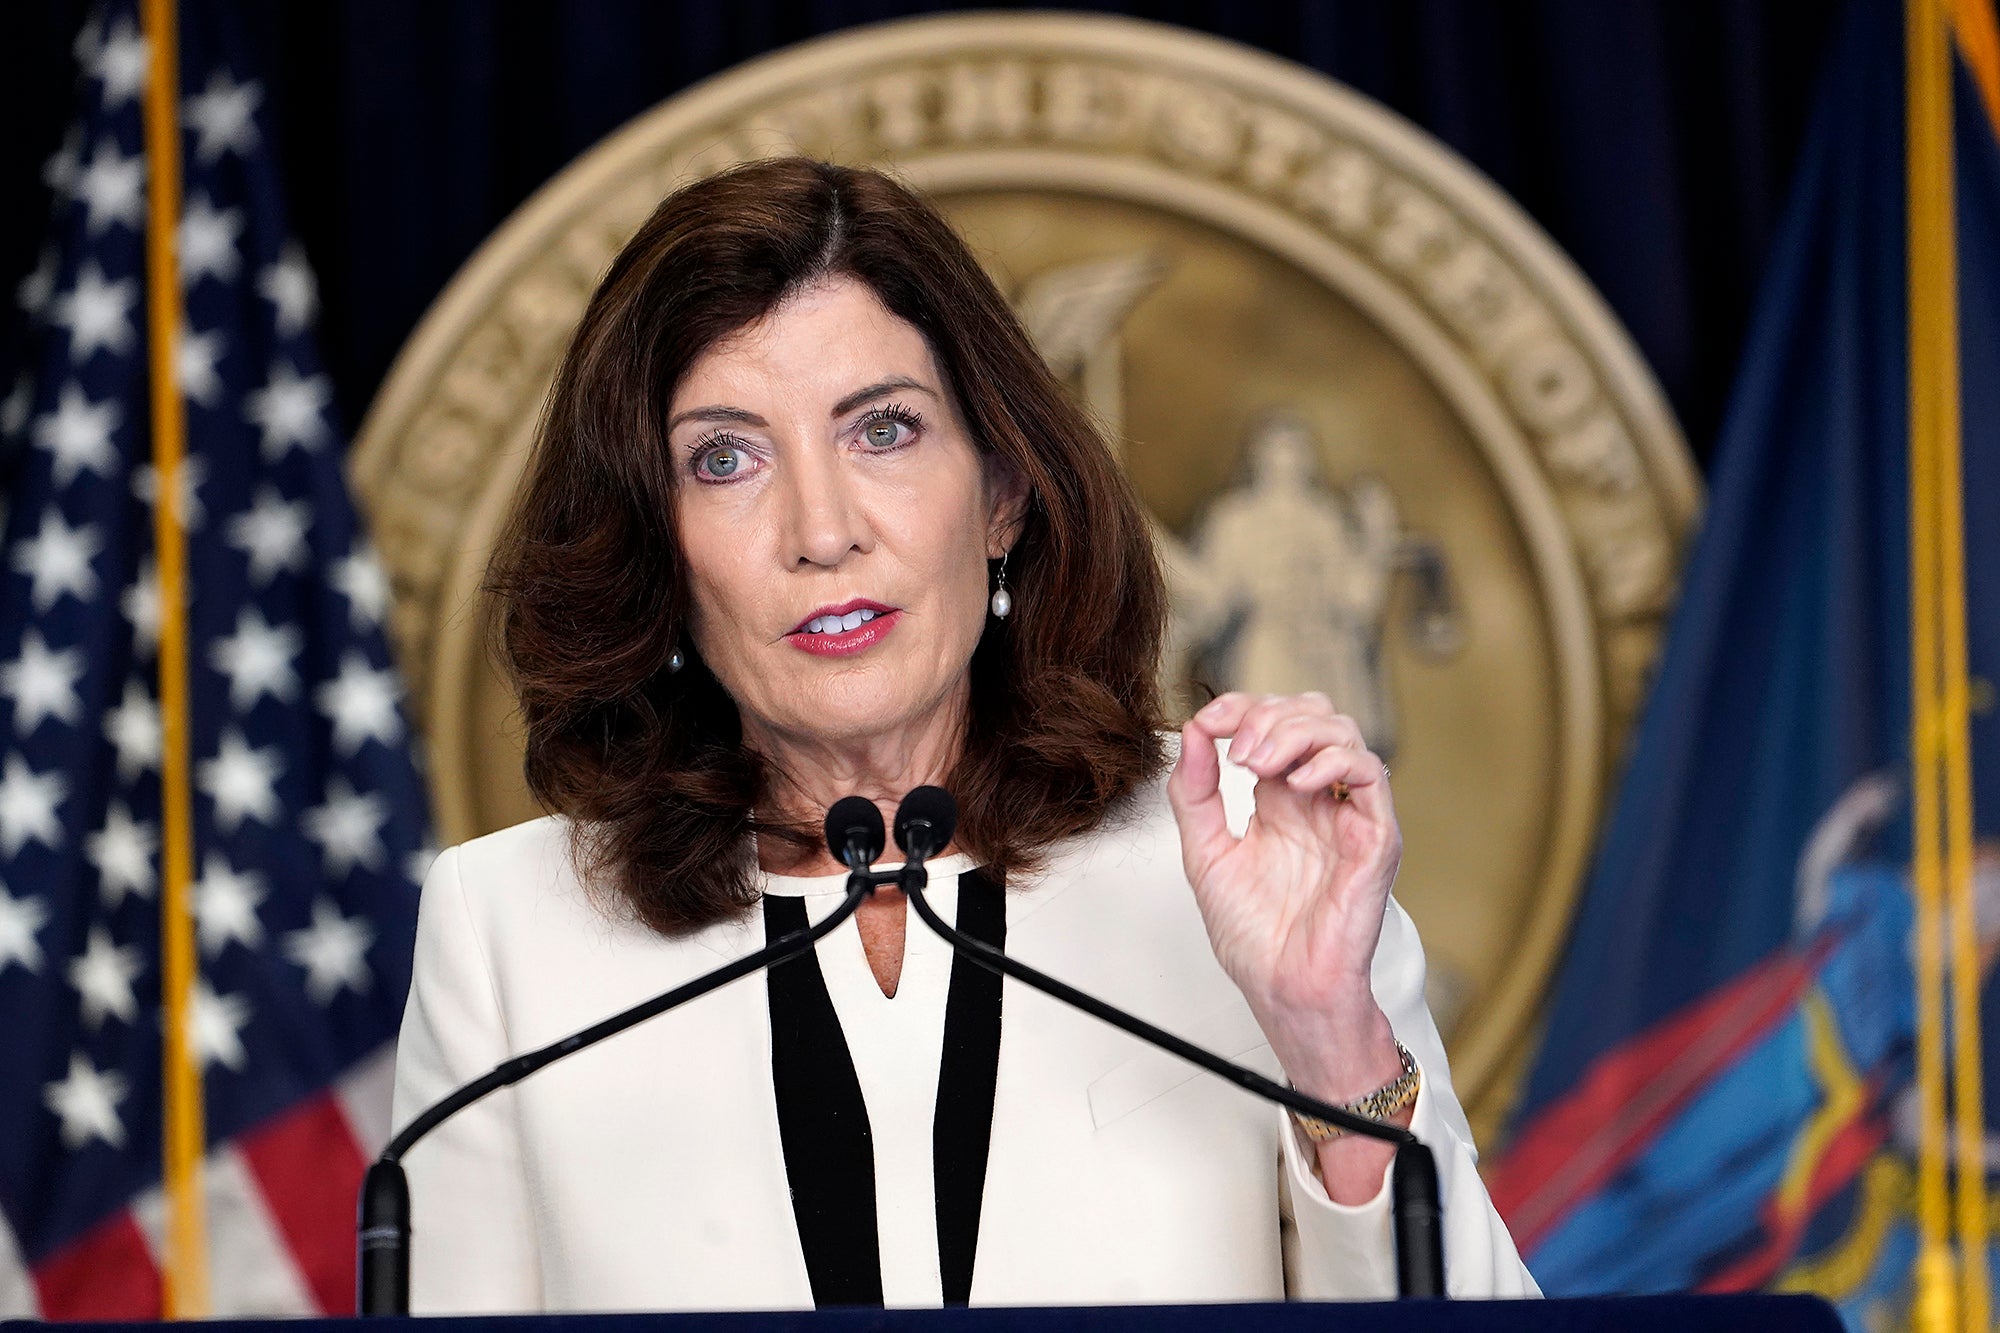 New York Gov. Kathy Hochul speaks at a podium with the seal of New York behind her.